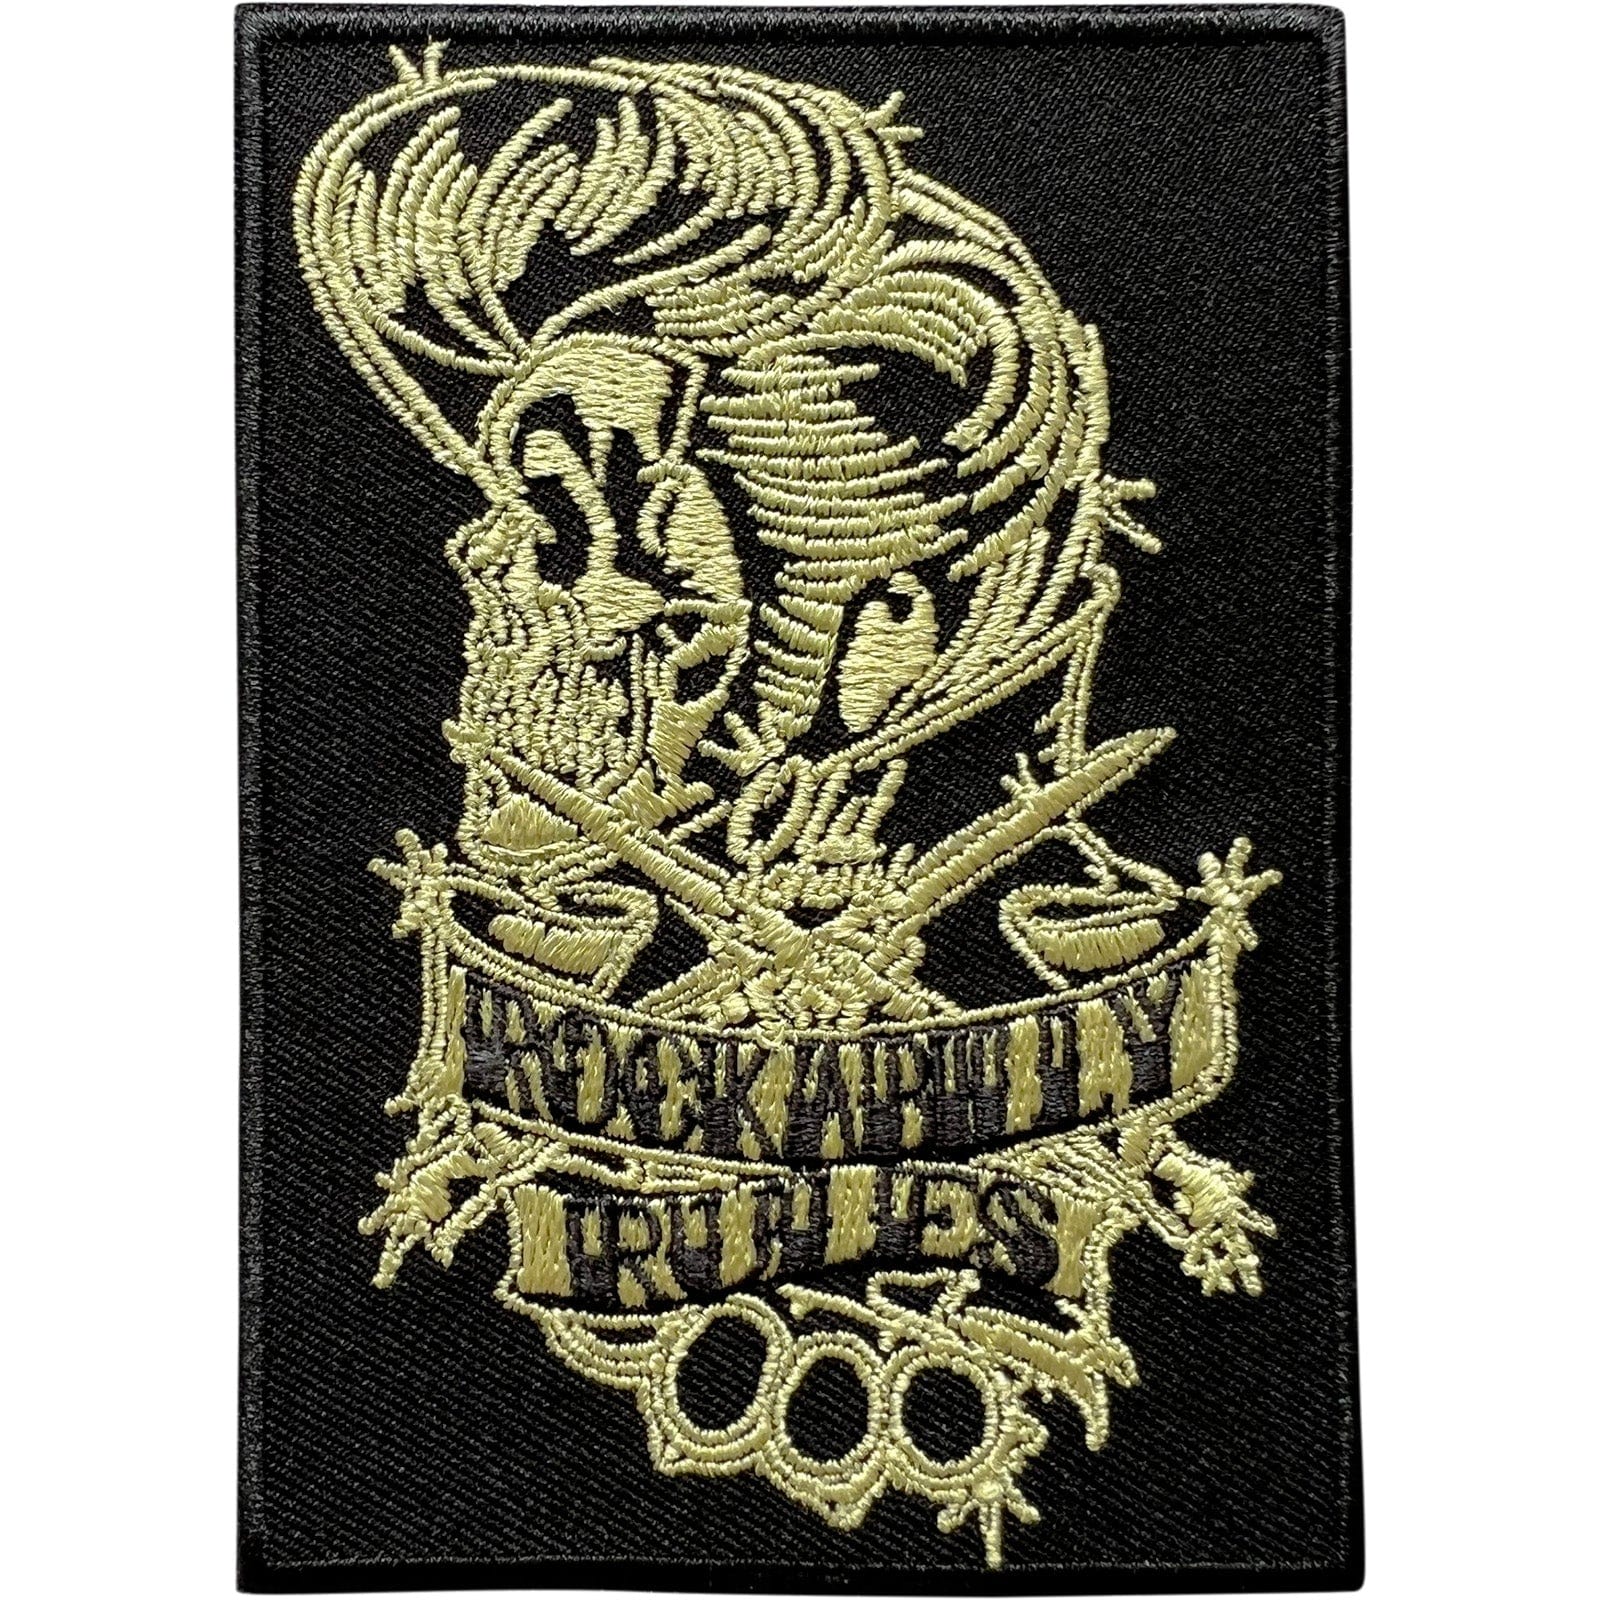 Rockabilly Rules Old School Patch Iron On Rock and Roll Music Embroide